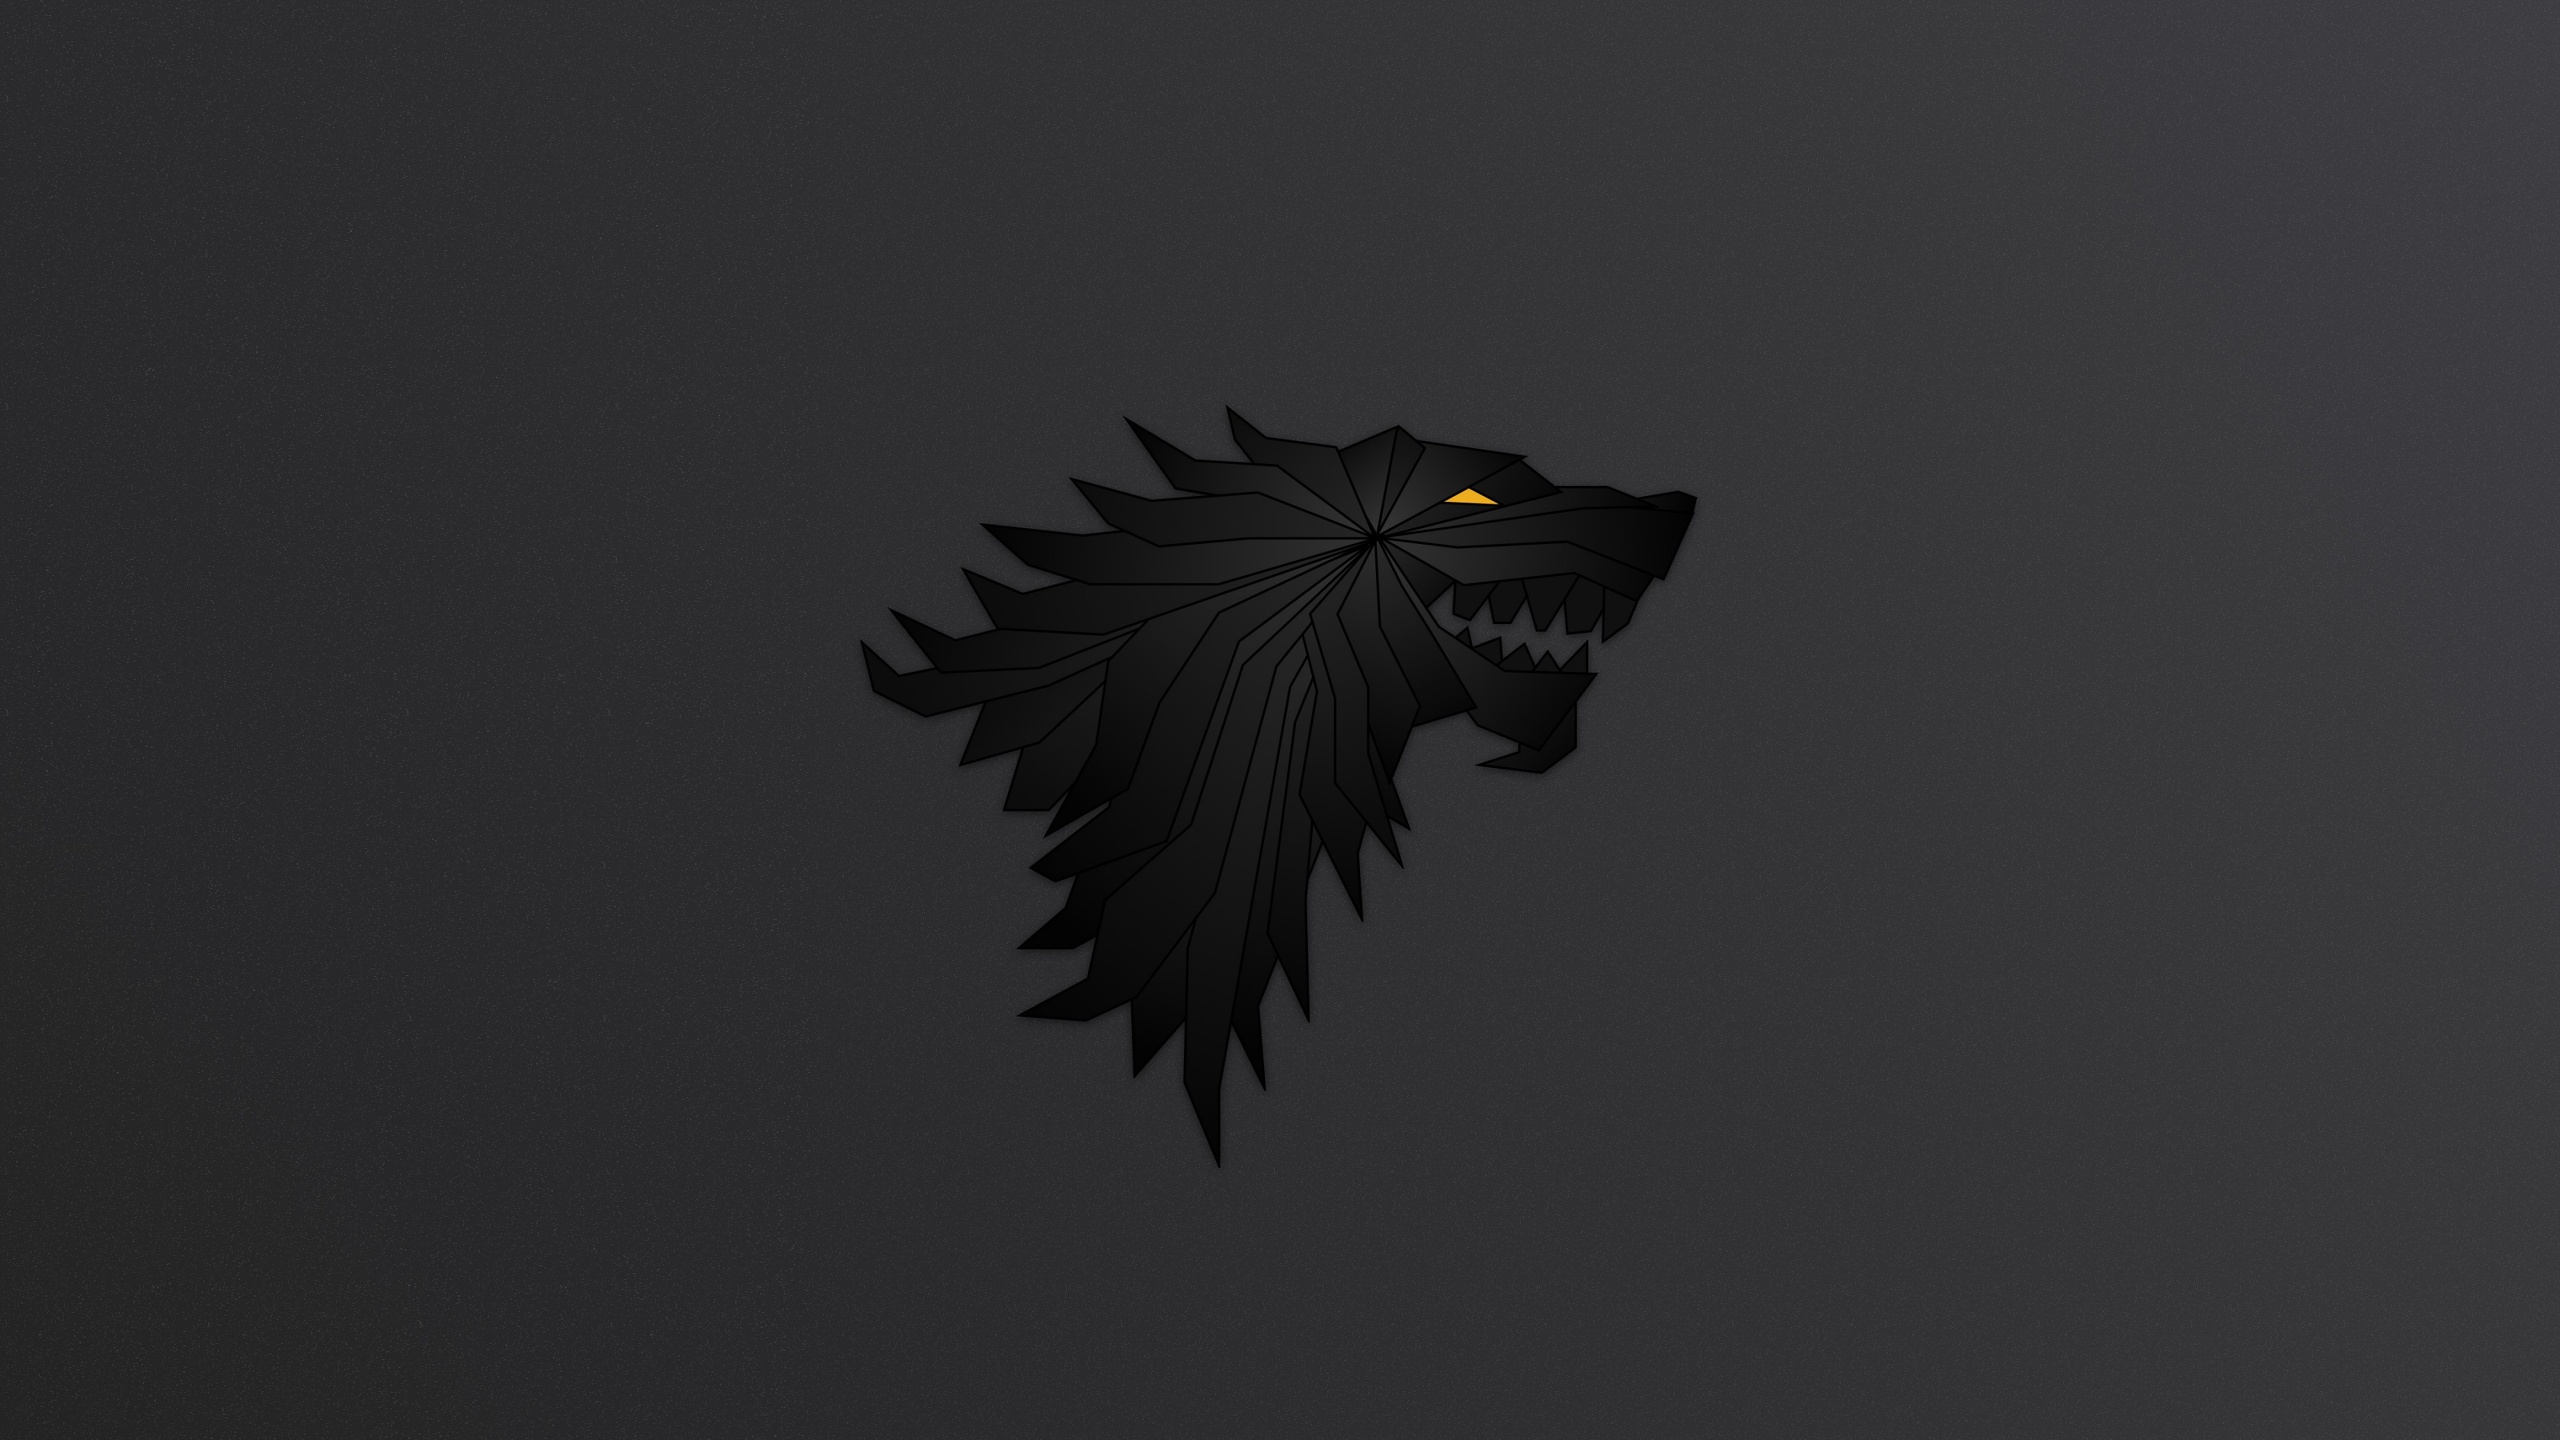 Game of thrones - loup - graphisme